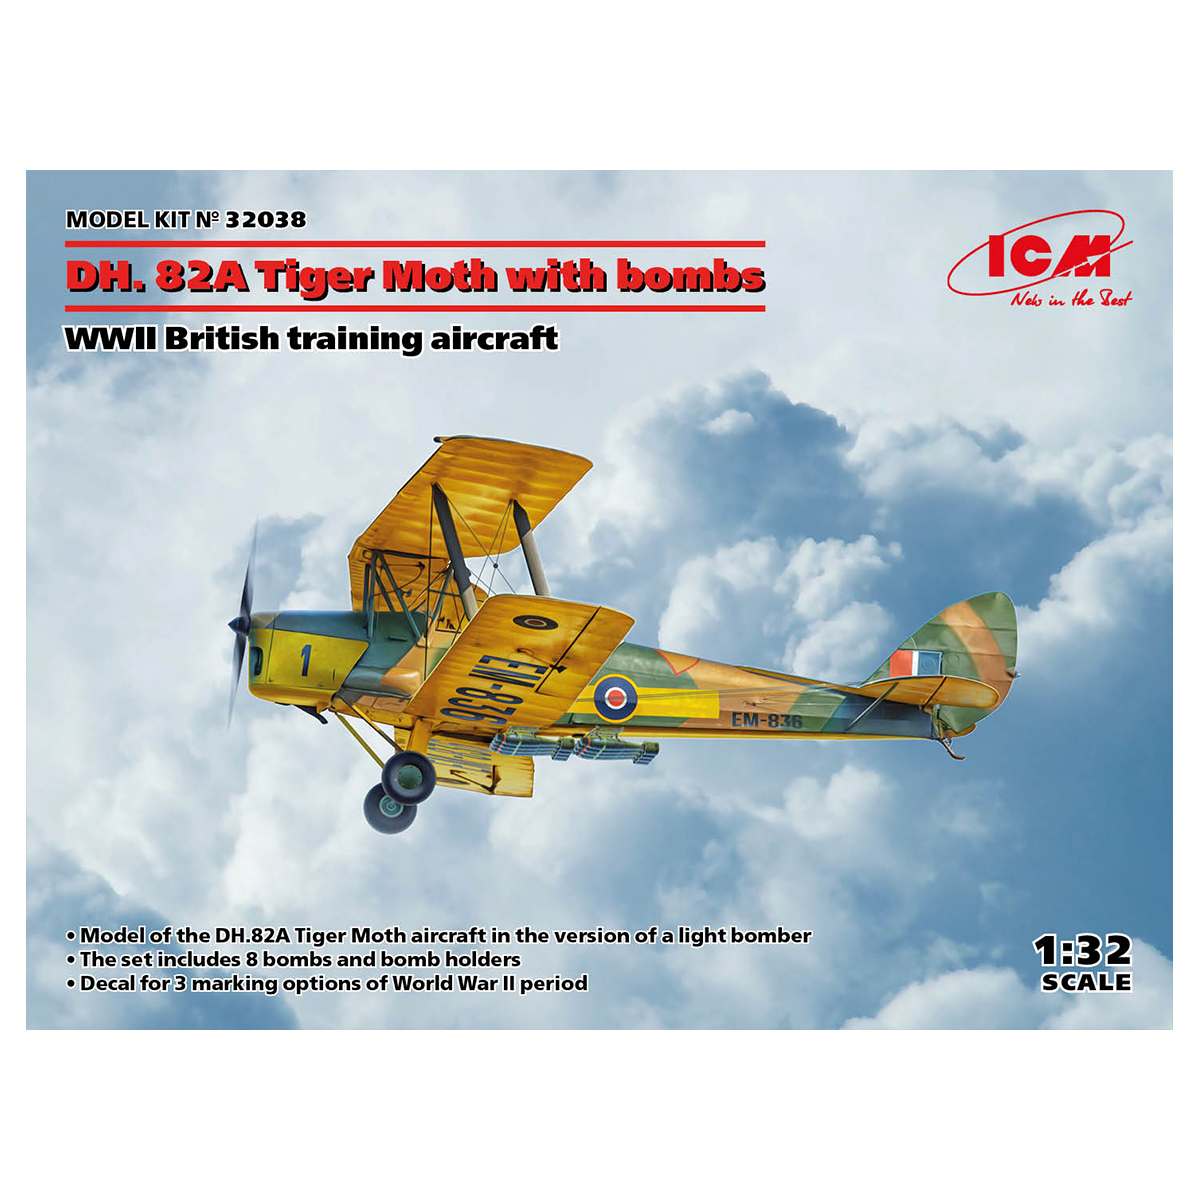 DH. 82A Tiger Moth with bombs,WWII British training aircraft 1/32